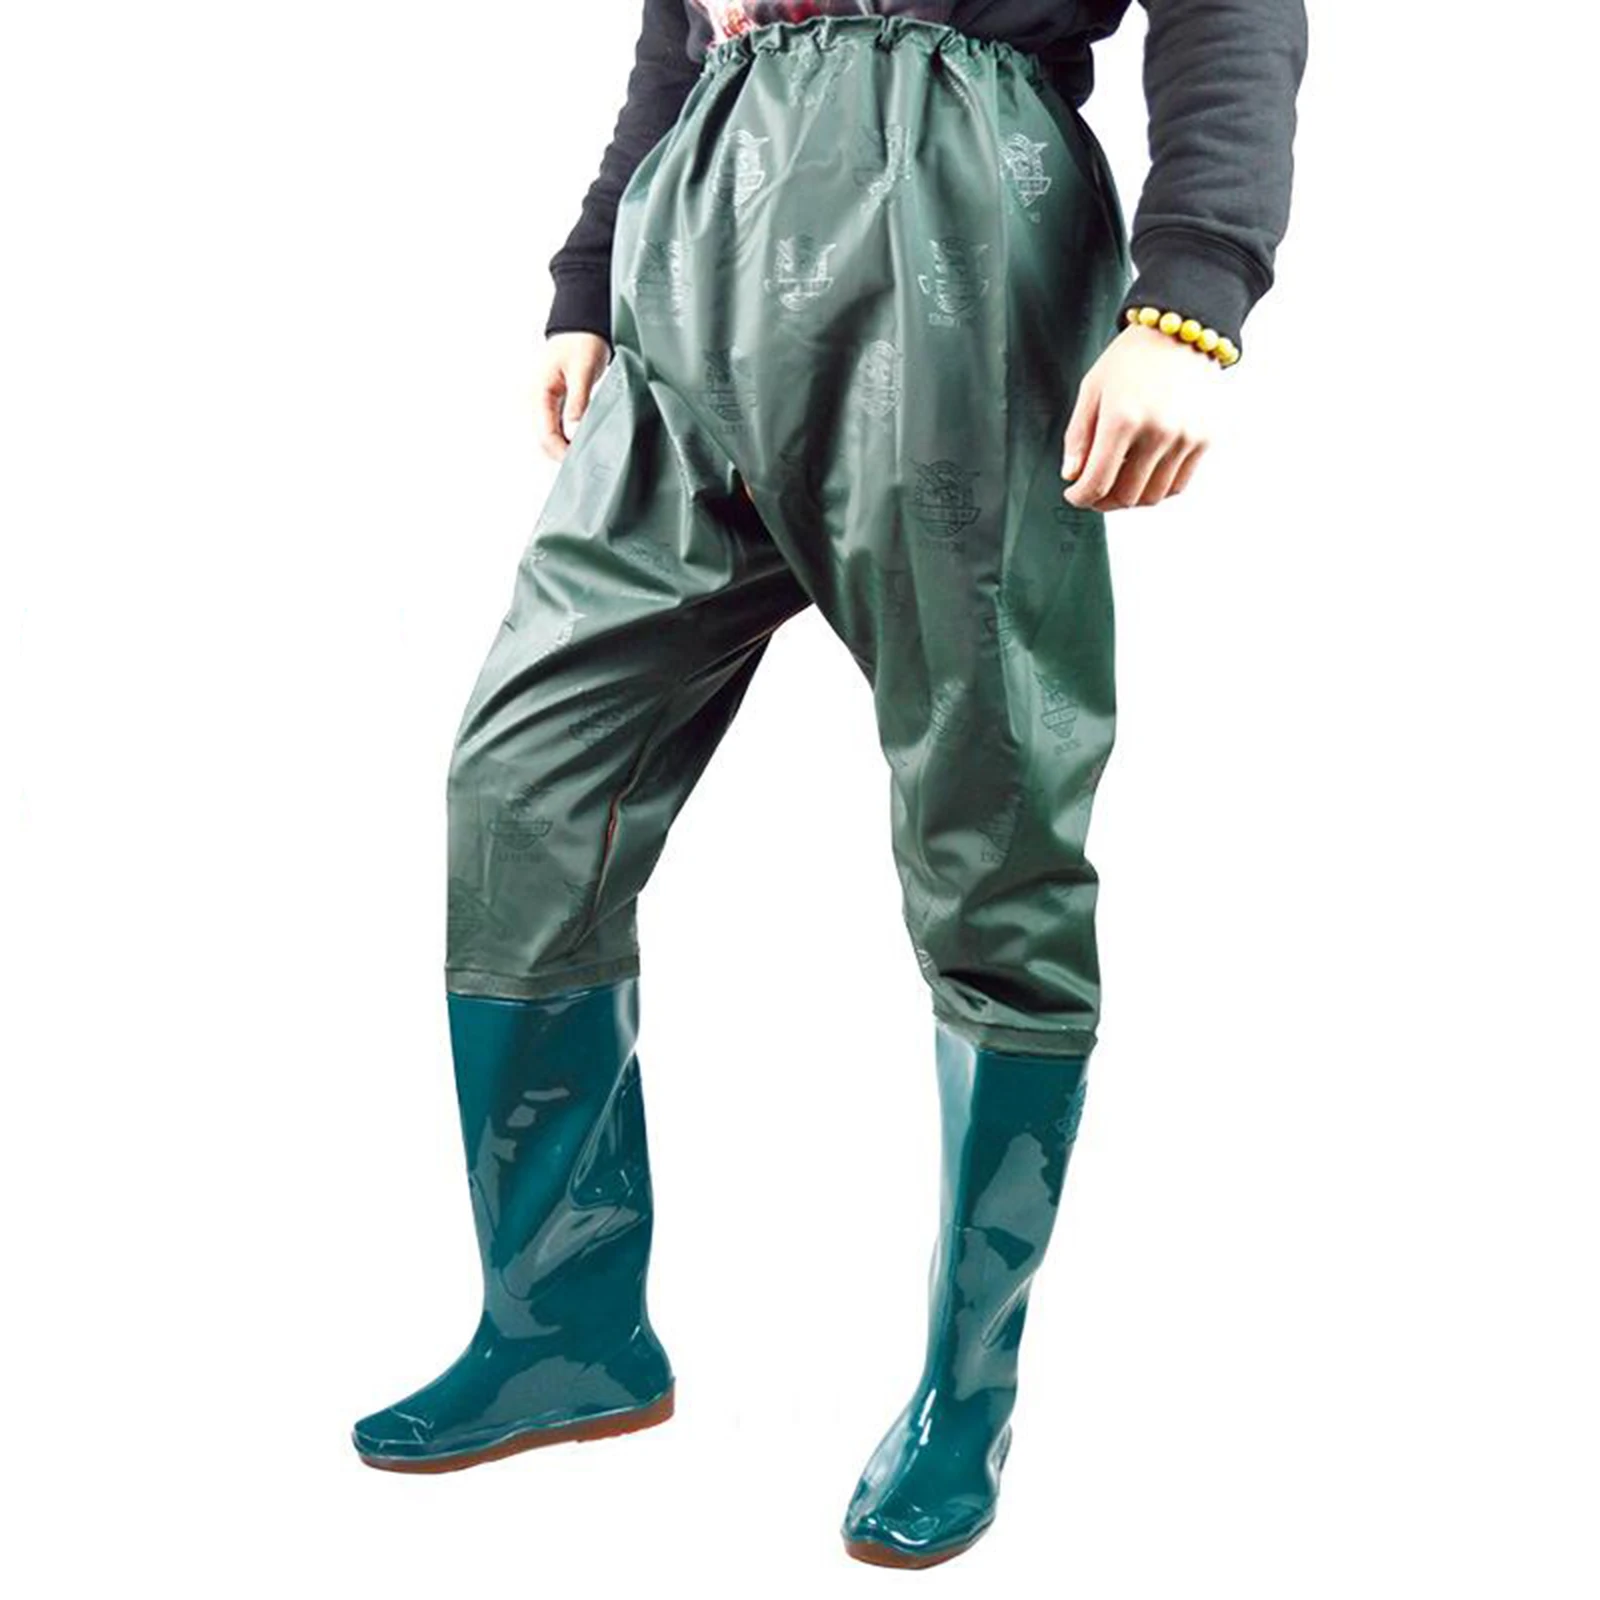 Ultralight Fishing Chest Waders Waterproof Lightweight Hunting Hip Waders with Anti- Boots Gardening Fishing Pants